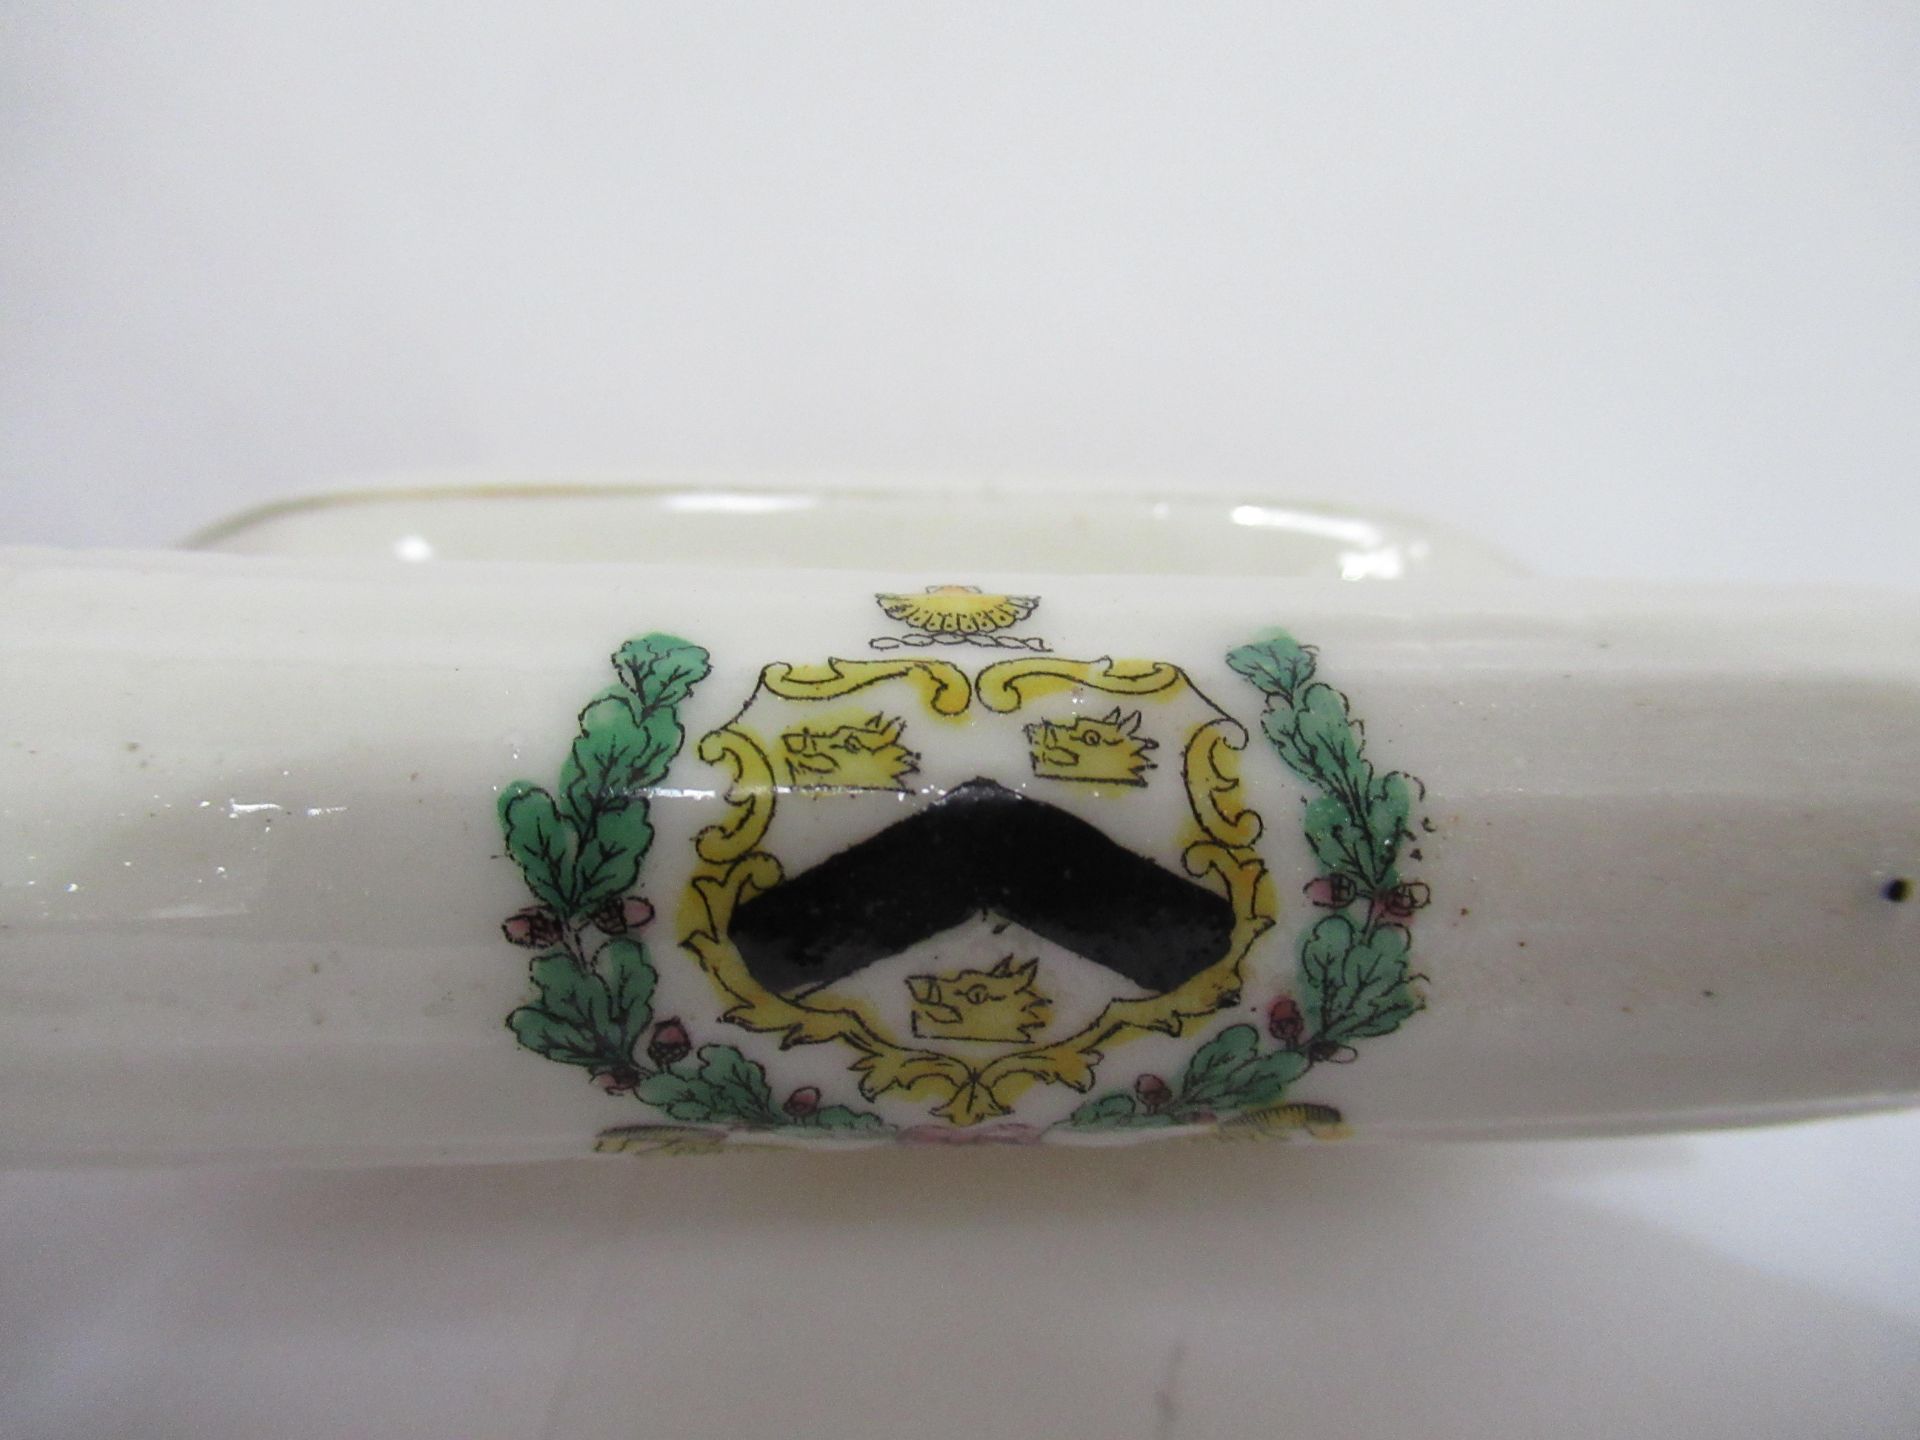 Crested China model of airship with Cleethorpes coat of arms (130mm x 55mm) - Image 7 of 8